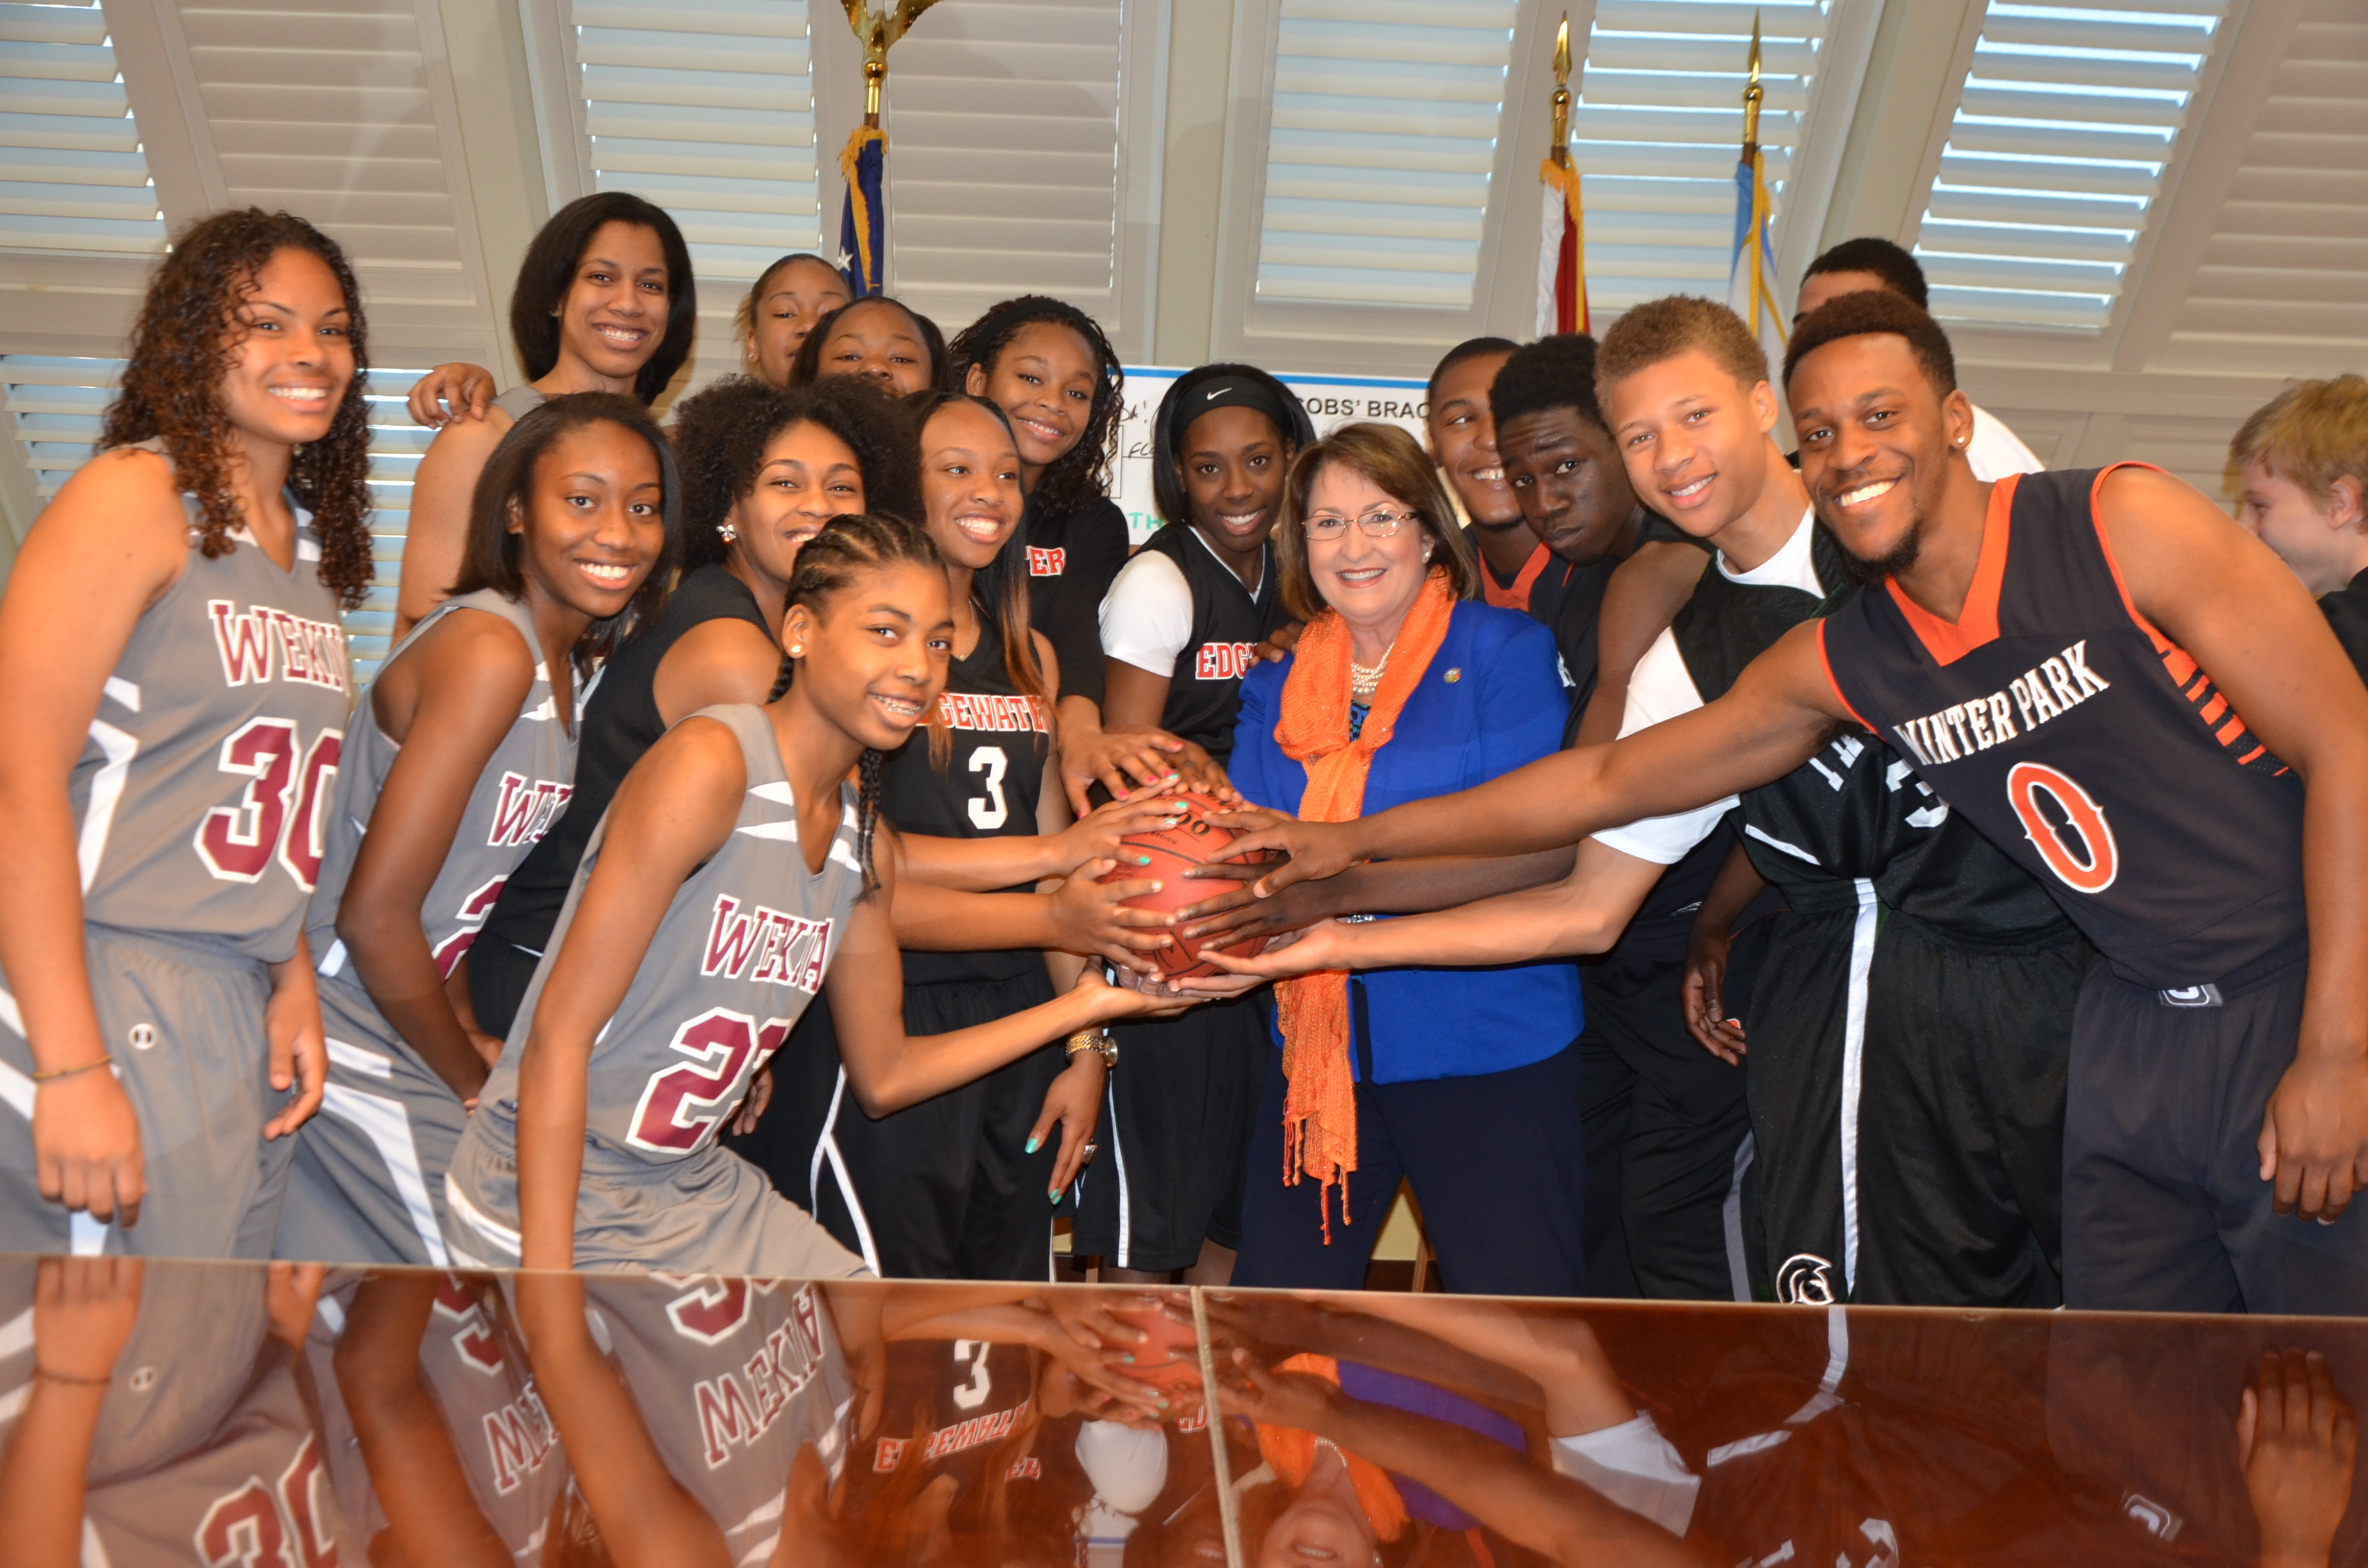 Mayor Jacobs with student athletes